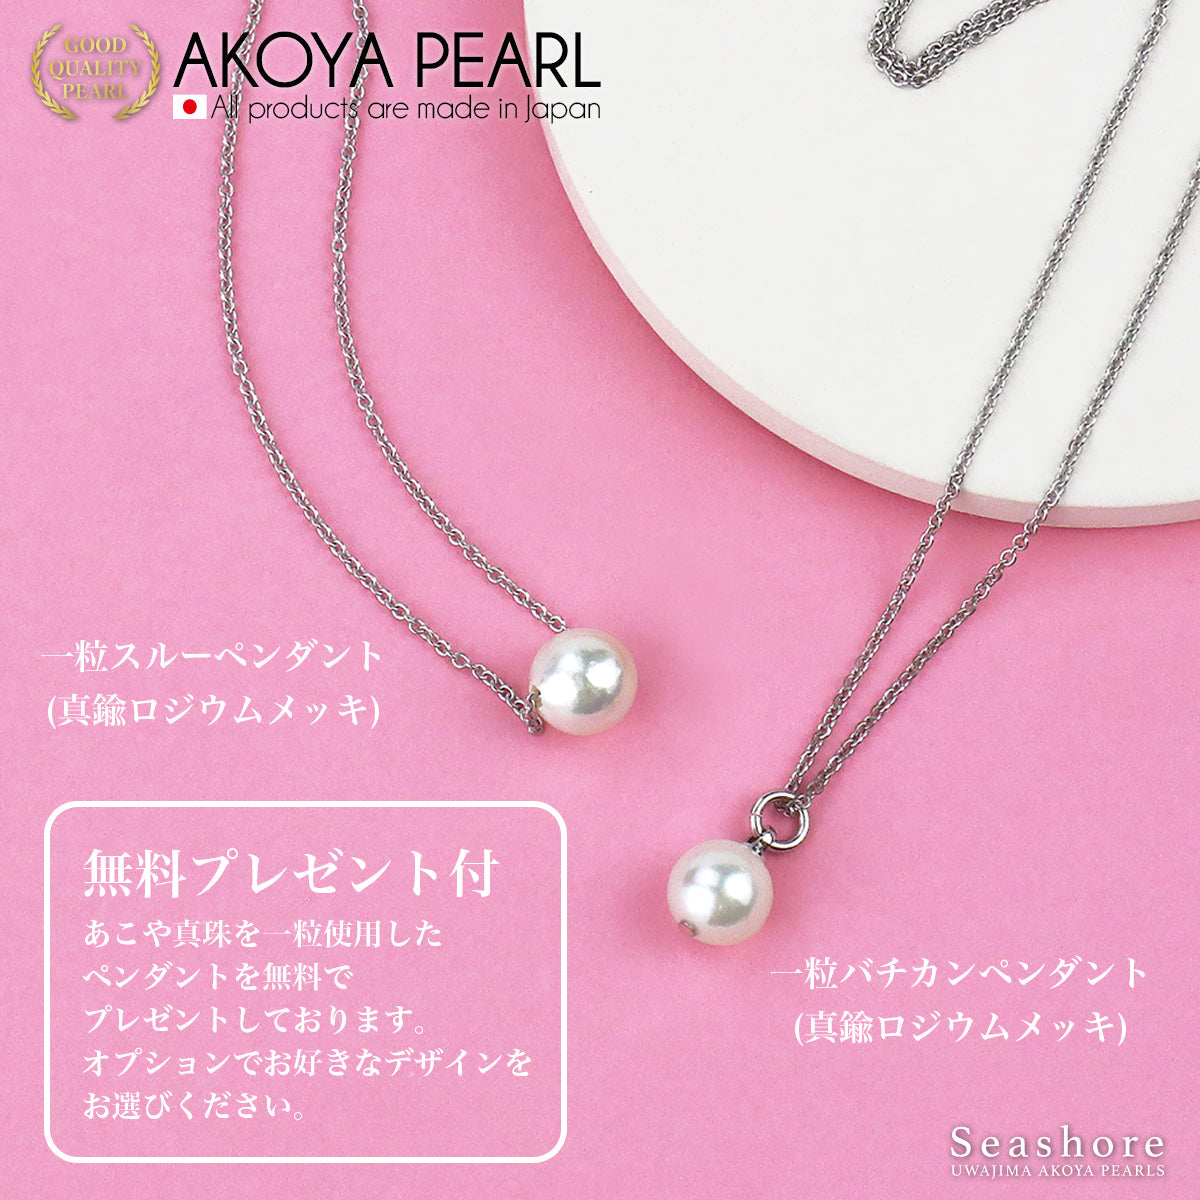 Akoya Pearl Black Pearl Shell Leather Strap Long Pendant 70-75cm [8.0-8.5mm] Genuine Leather Cord Cardboard Case Included (3839)